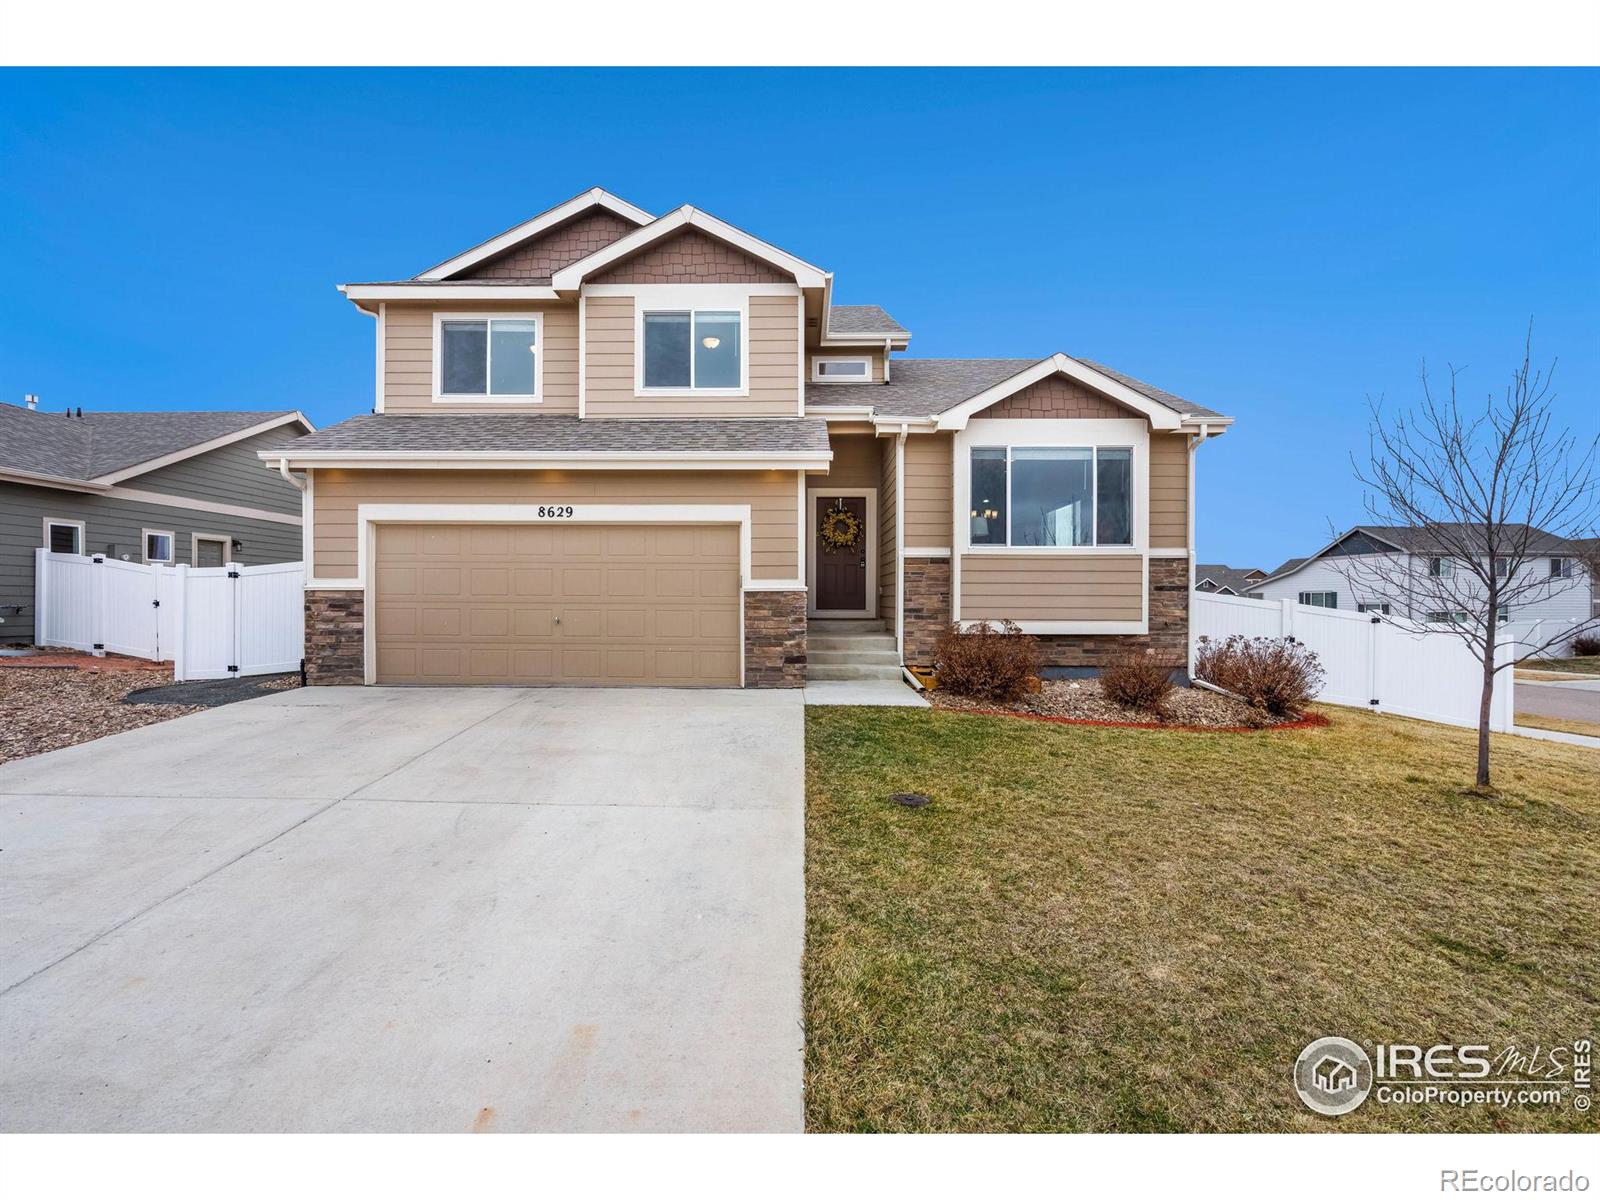 Report Image for 8629  16th St Rd,Greeley, Colorado